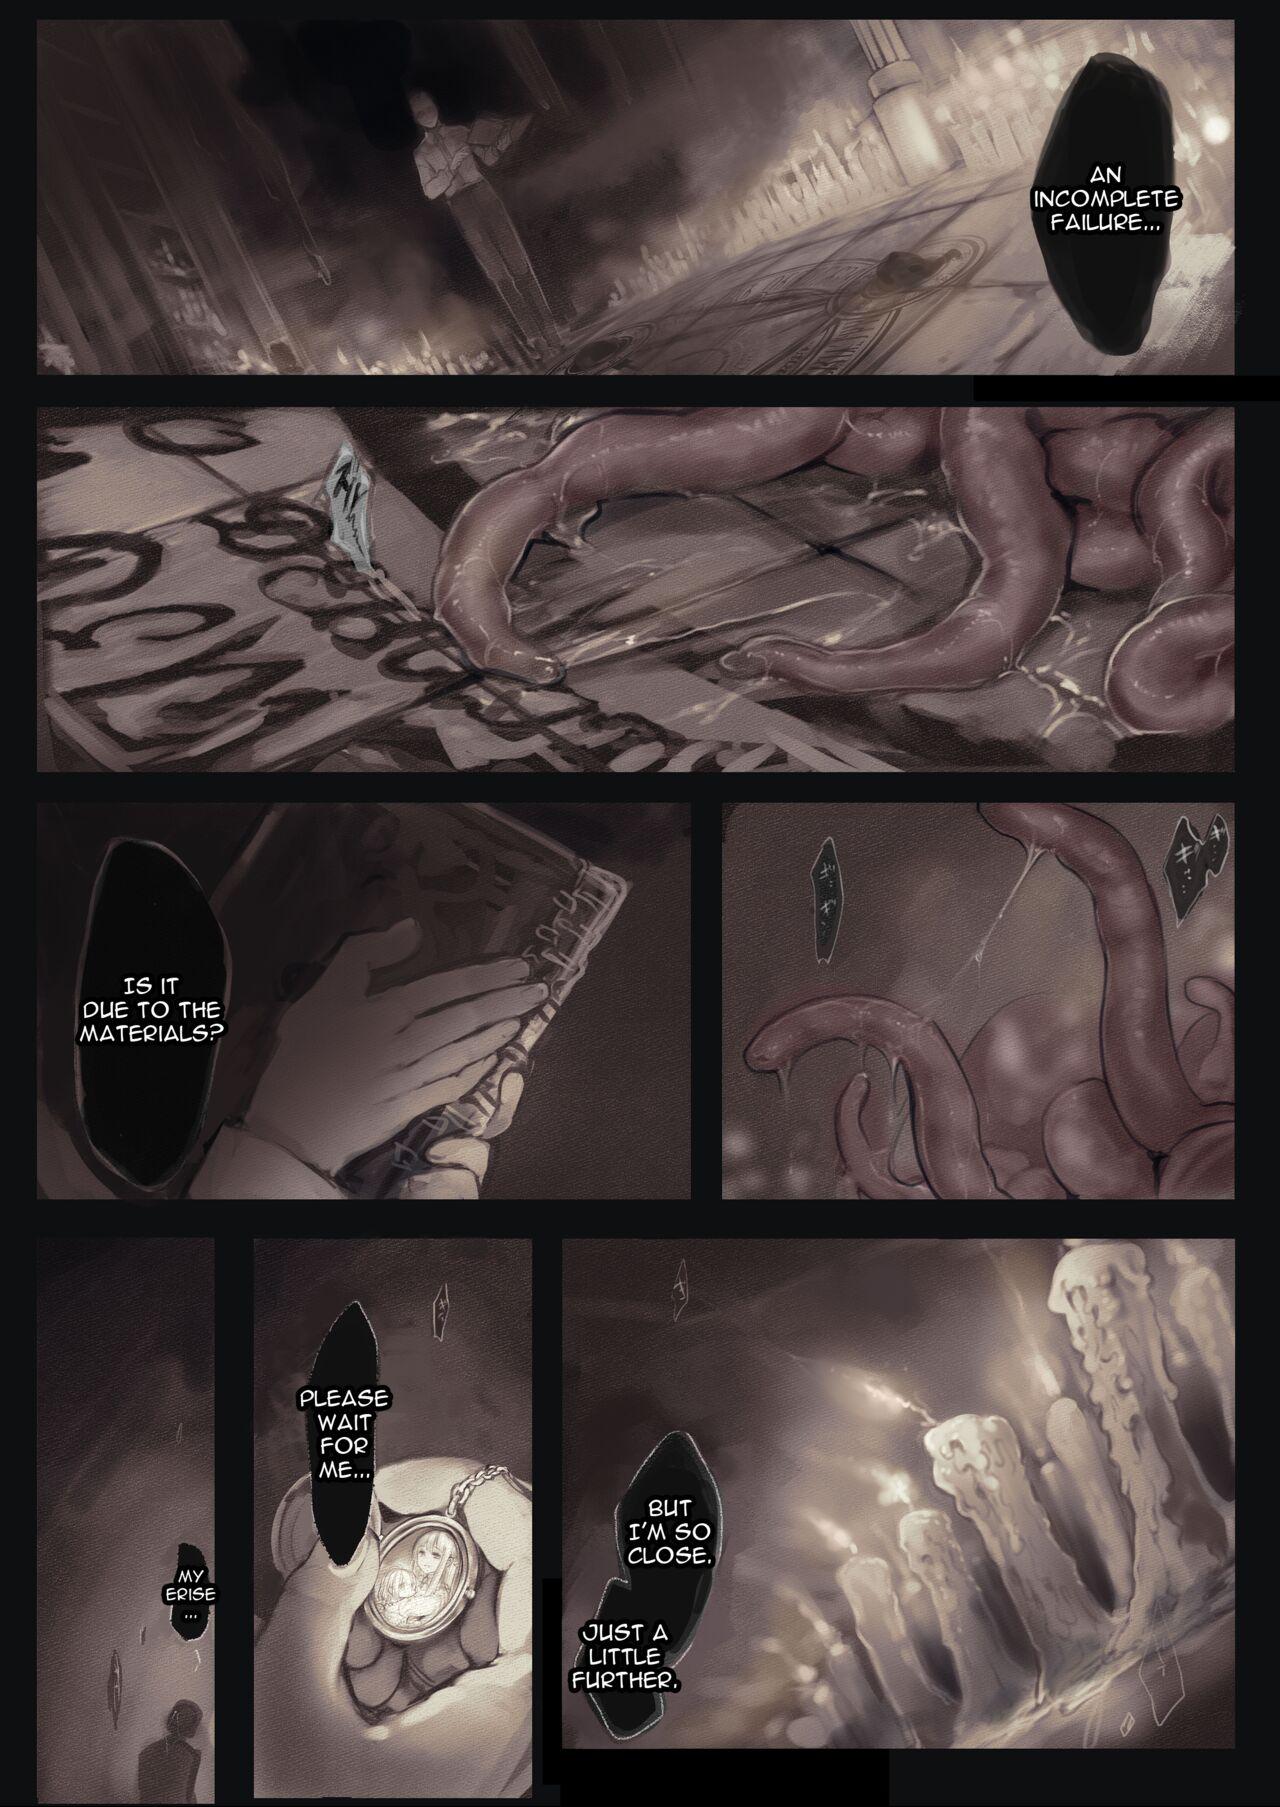 Gang A Girl Embraced By The Tentacle - part 1 - Original Blowing - Page 5